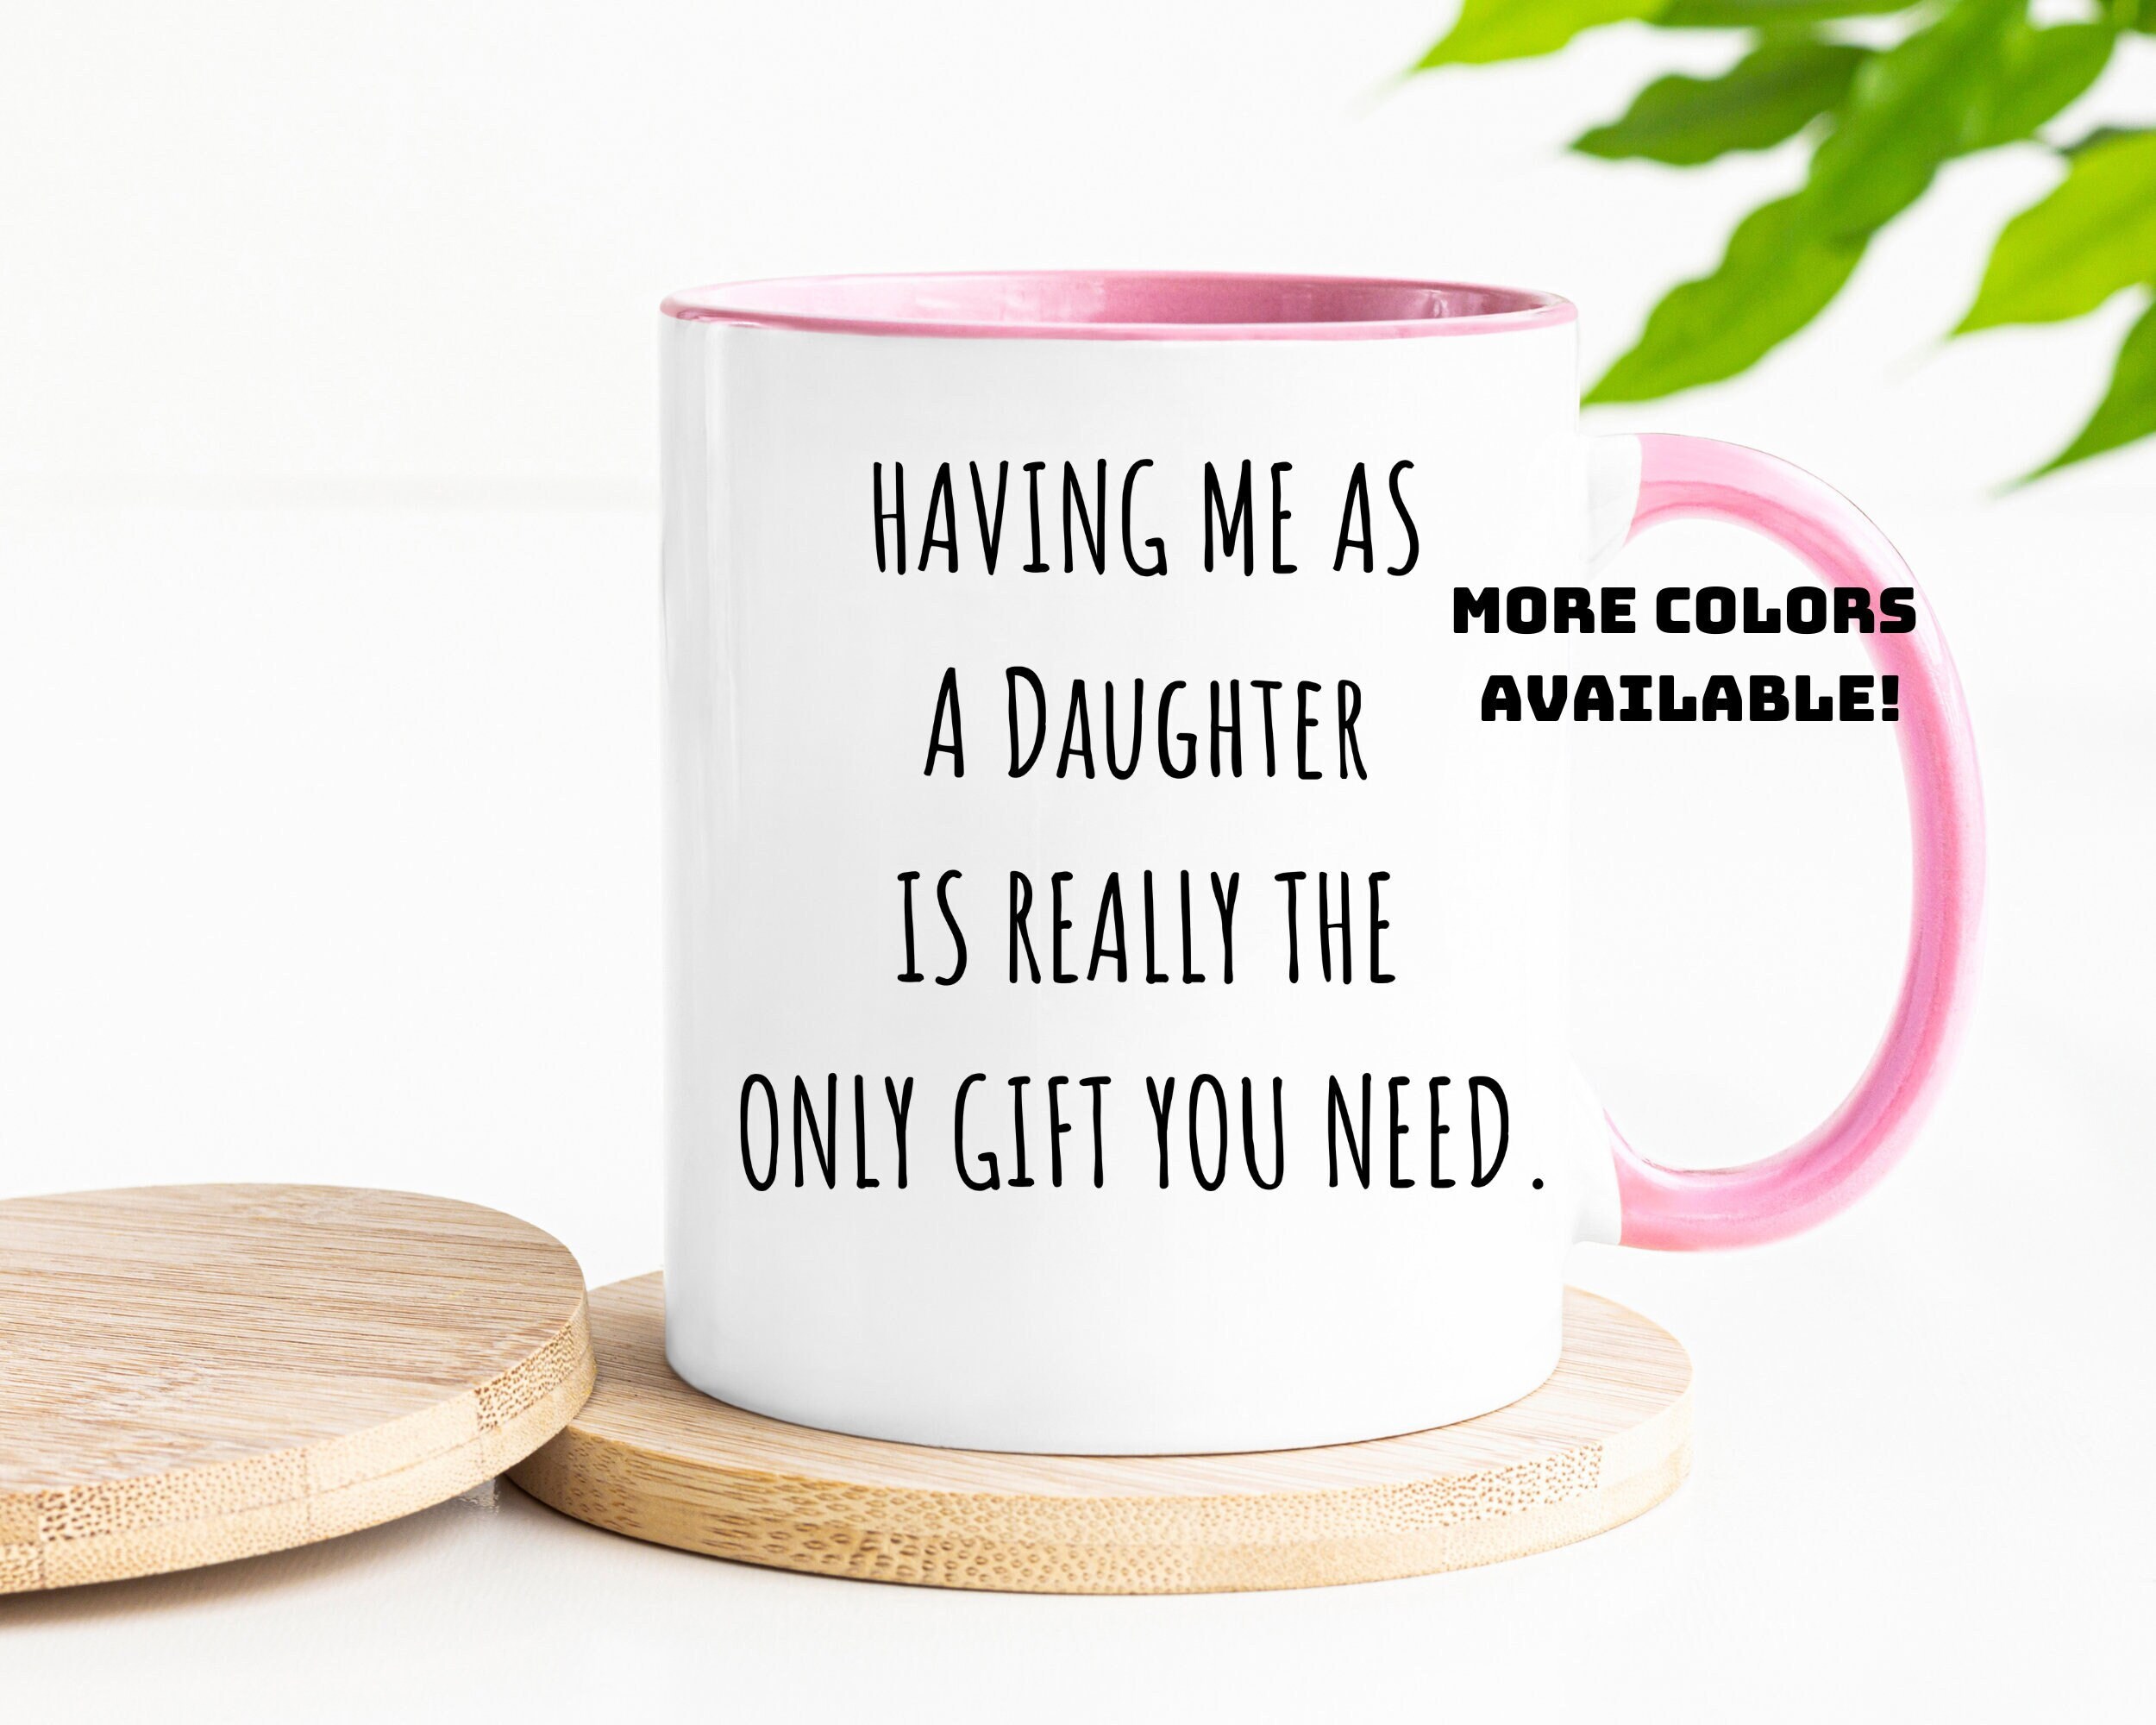 Having Me as a Daughter is Really The Only Gift You Need - Mom T-Shirt –  Nice Stuff For Mom